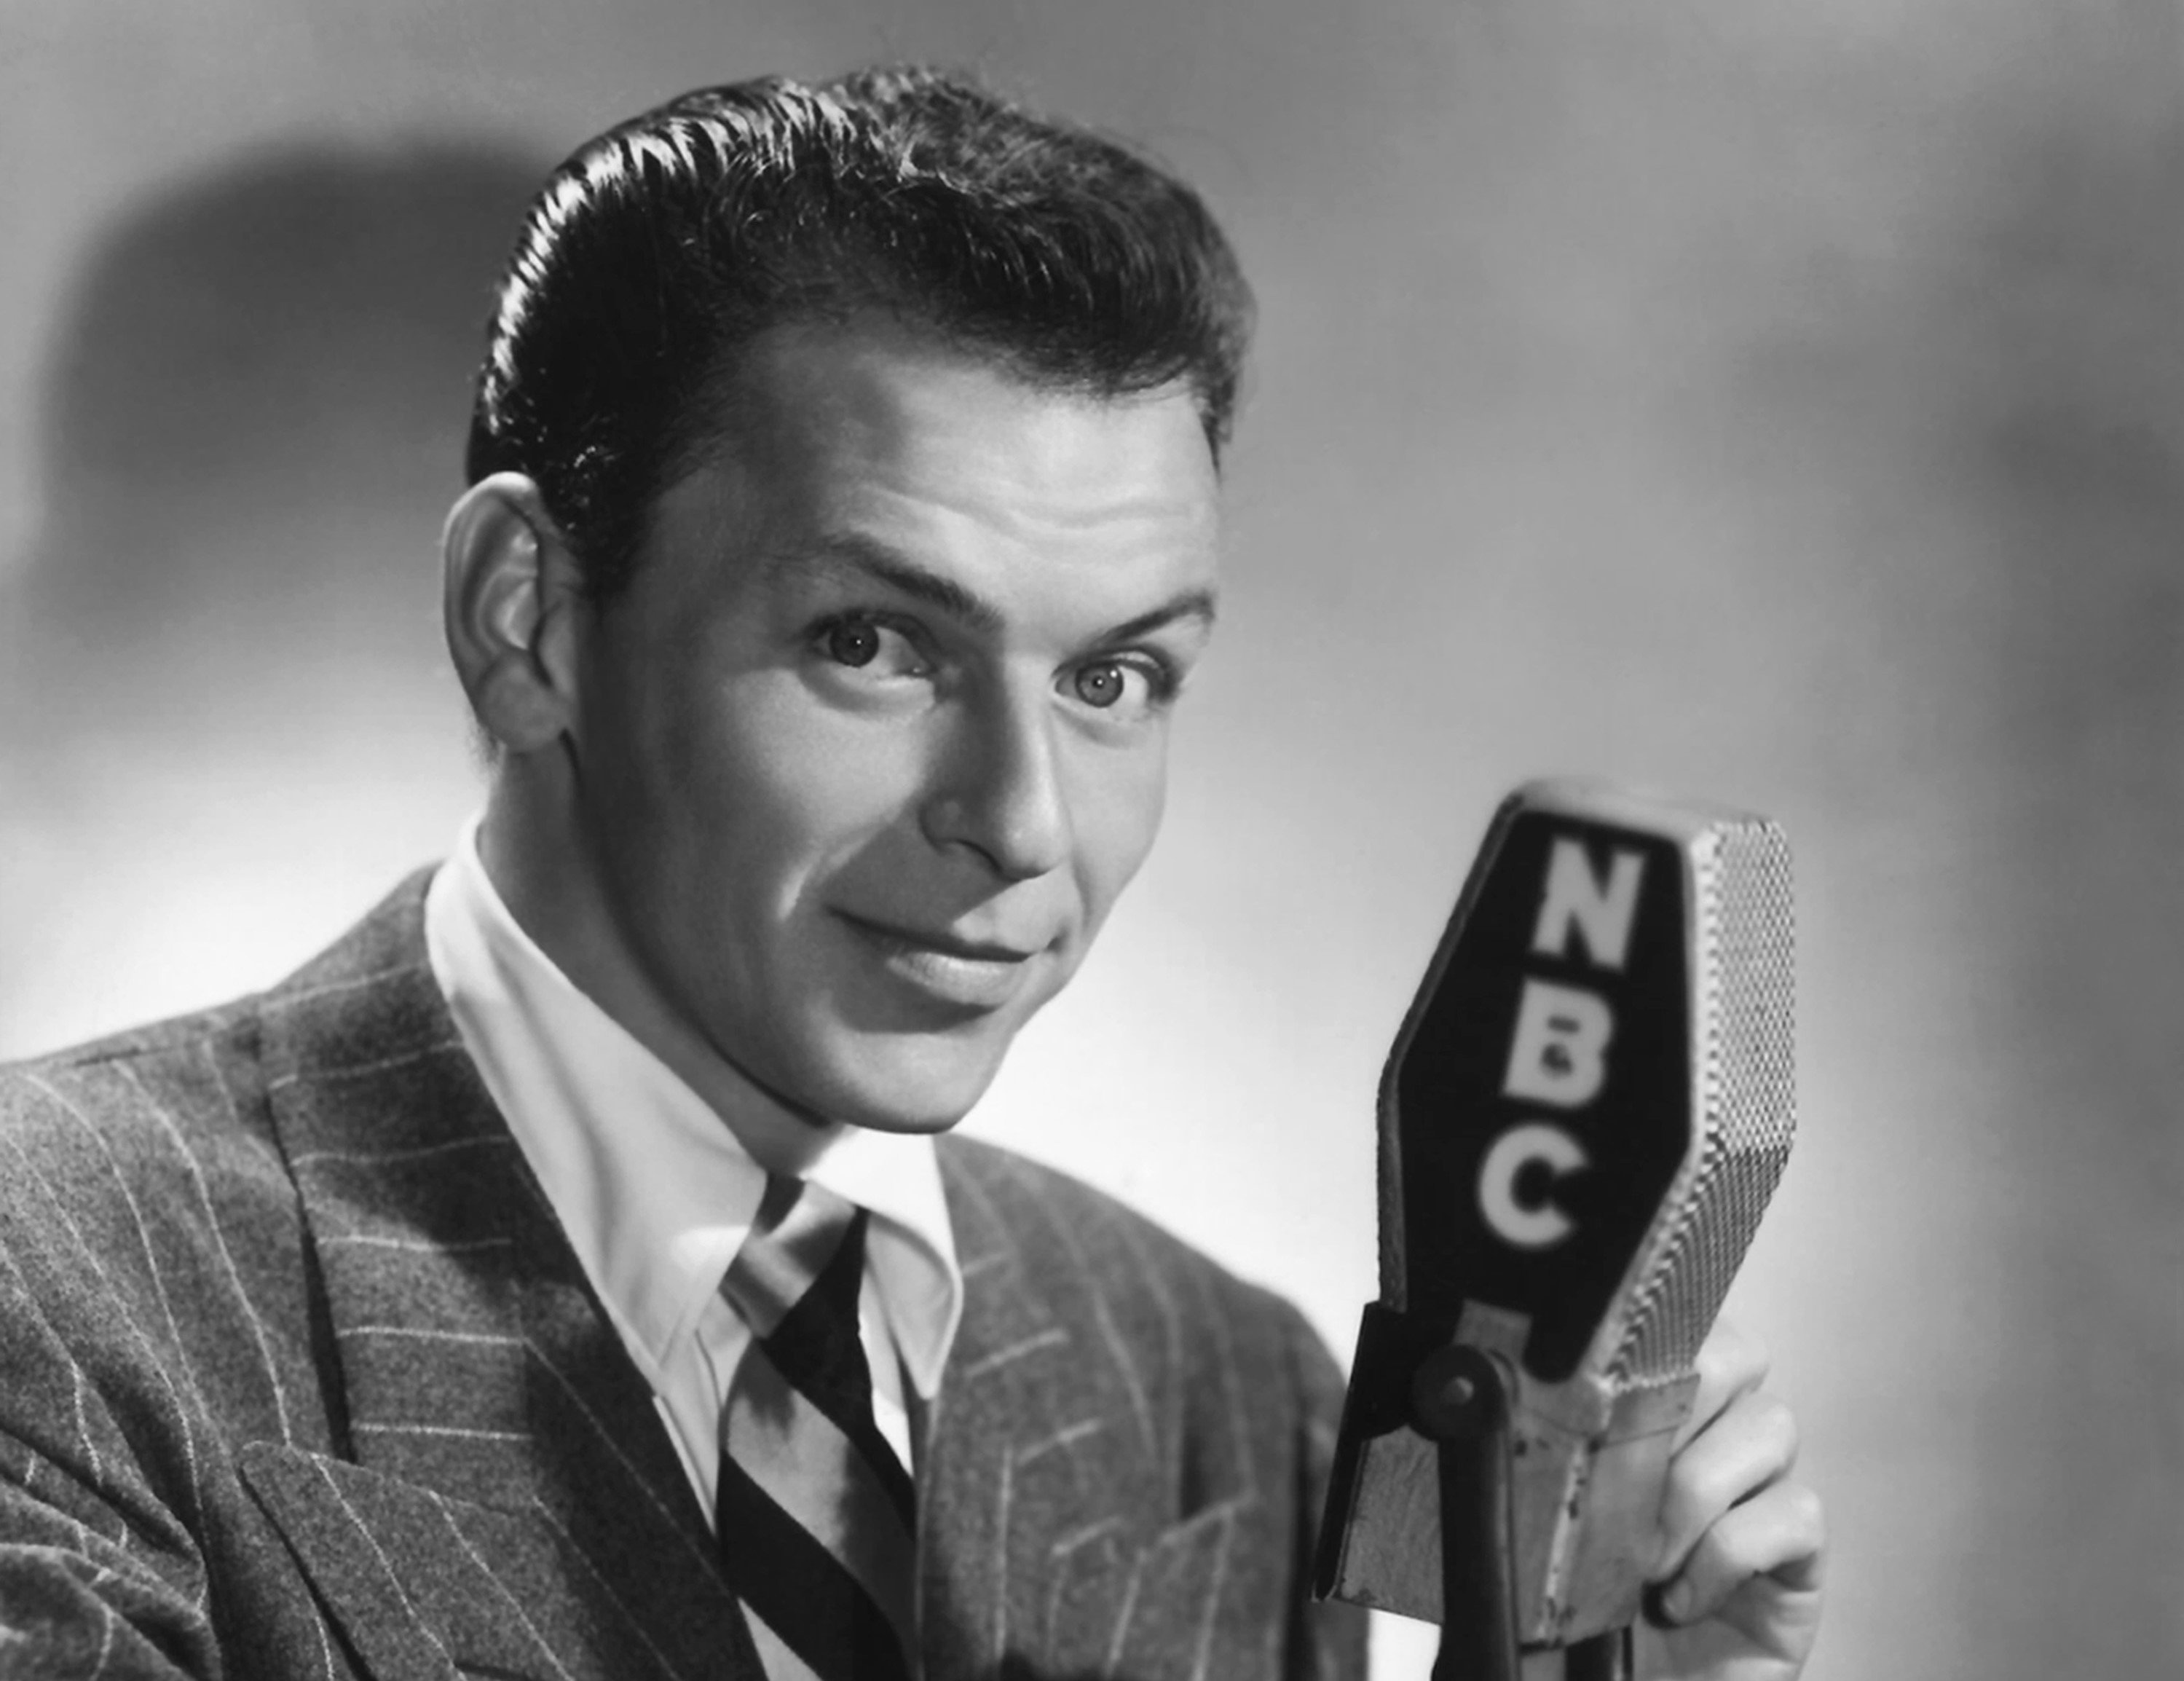 Frank Sinatra wears a suit and holds an NBC microphone.